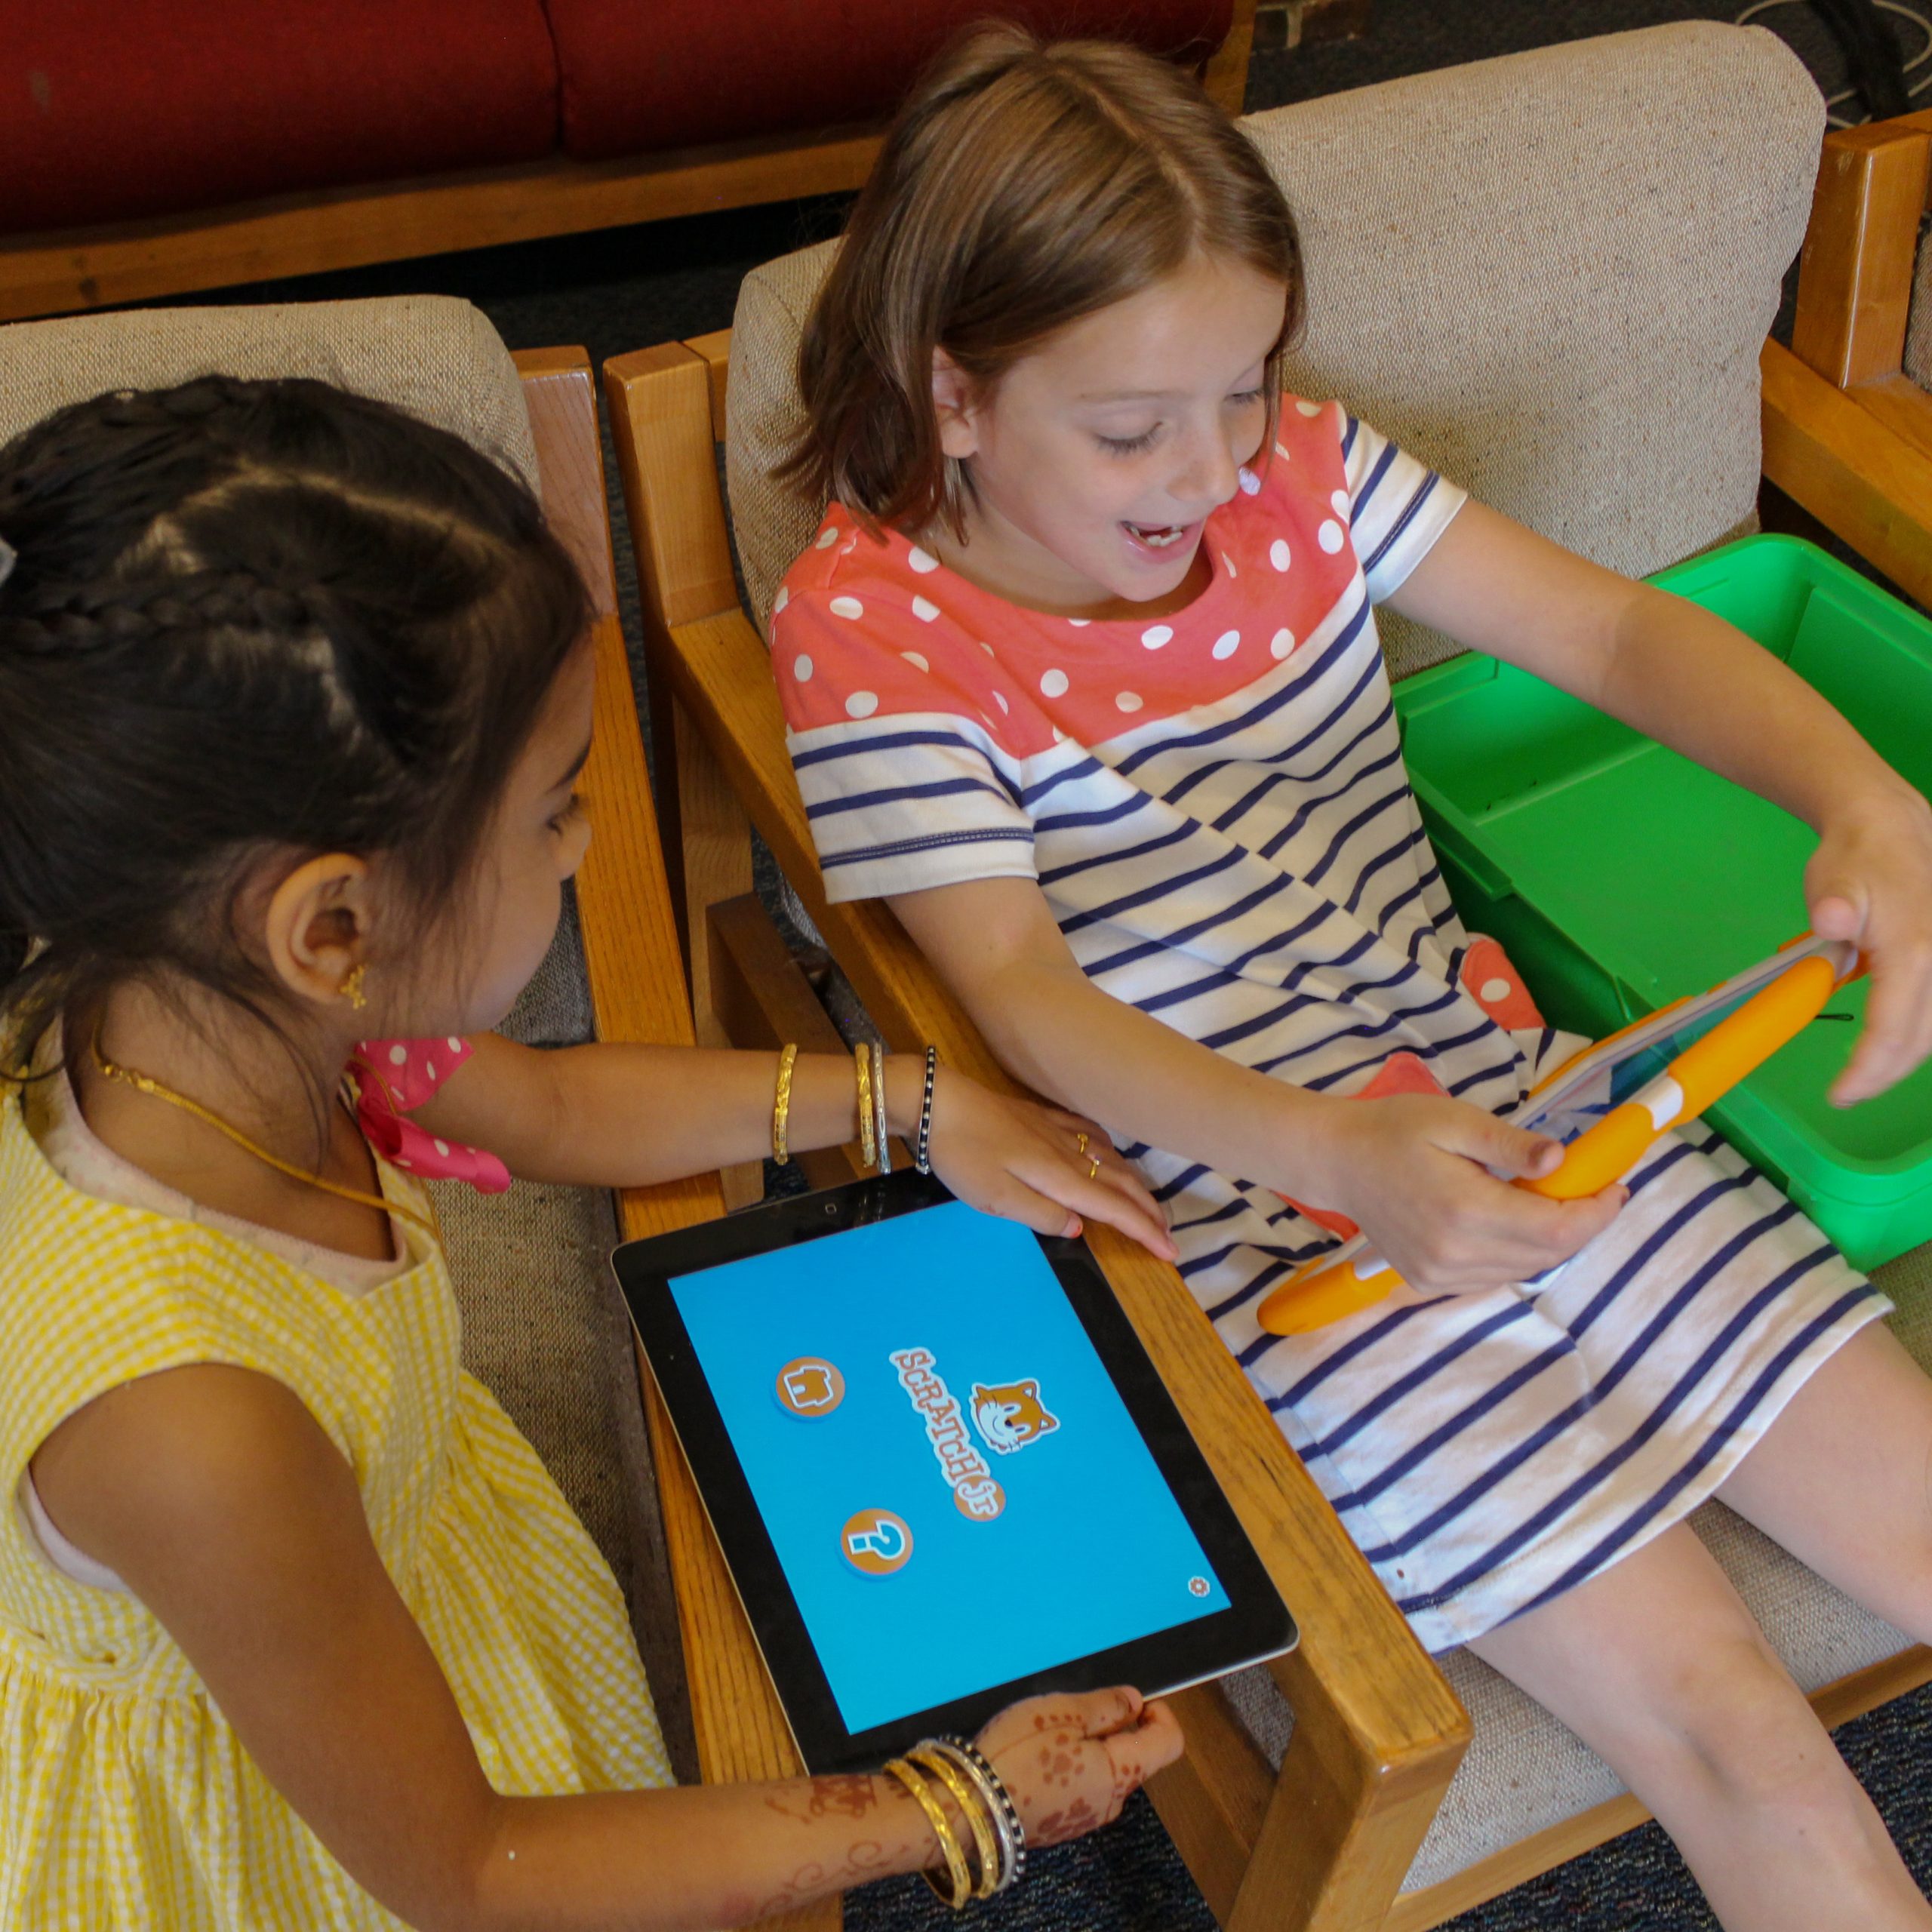 A photo of two young children each using iPads with the ScratchJr app open and smiling.